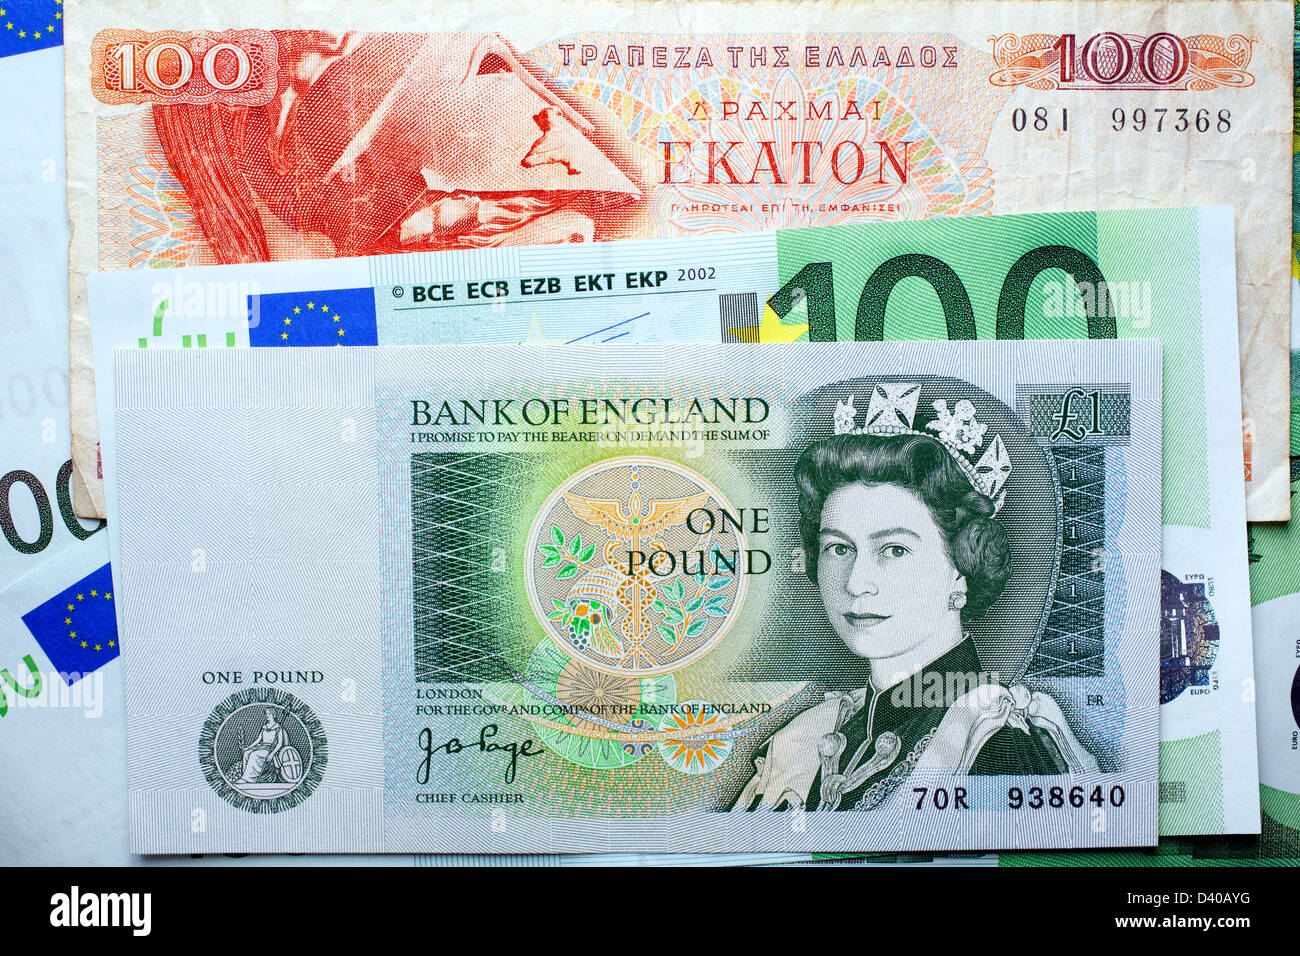 Currency london Information on